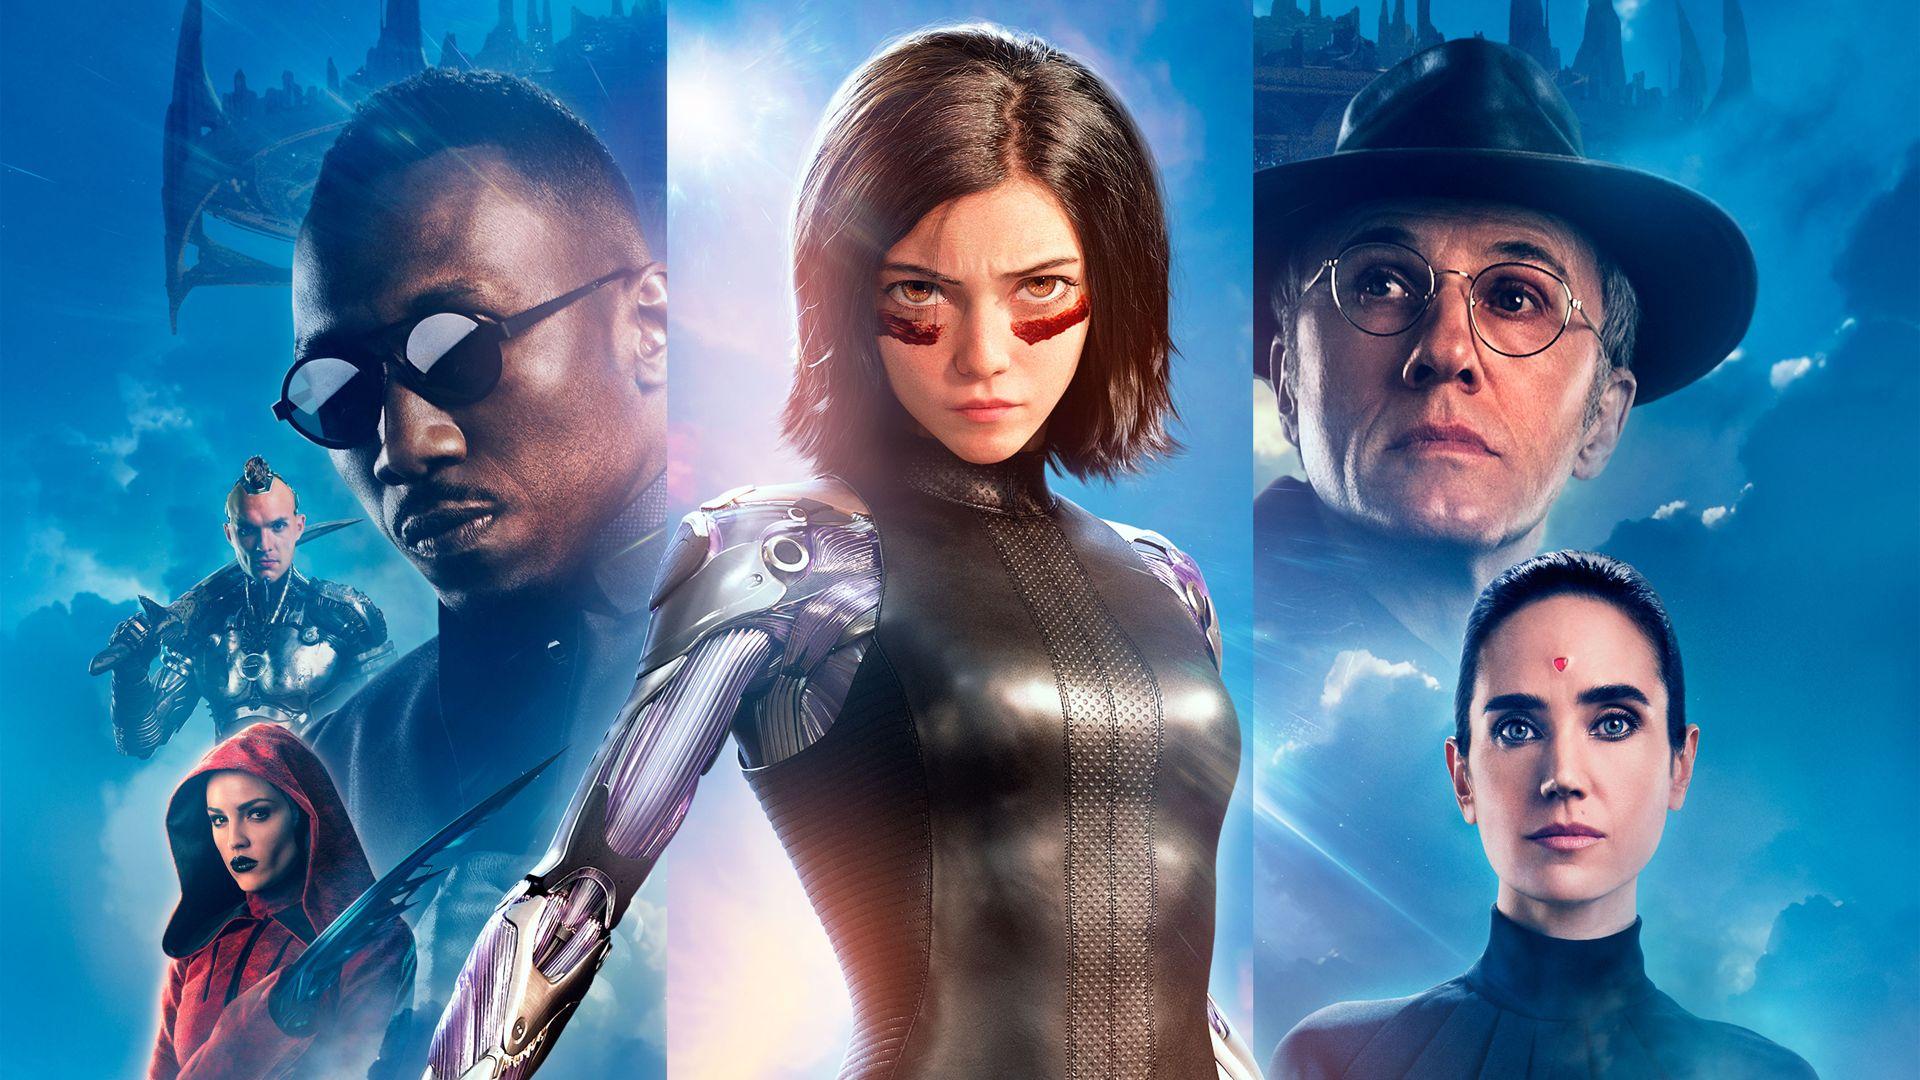 Alita Battle Angel 2 Cast Updates Alita Sequel will Introduce New Characters from the Manga